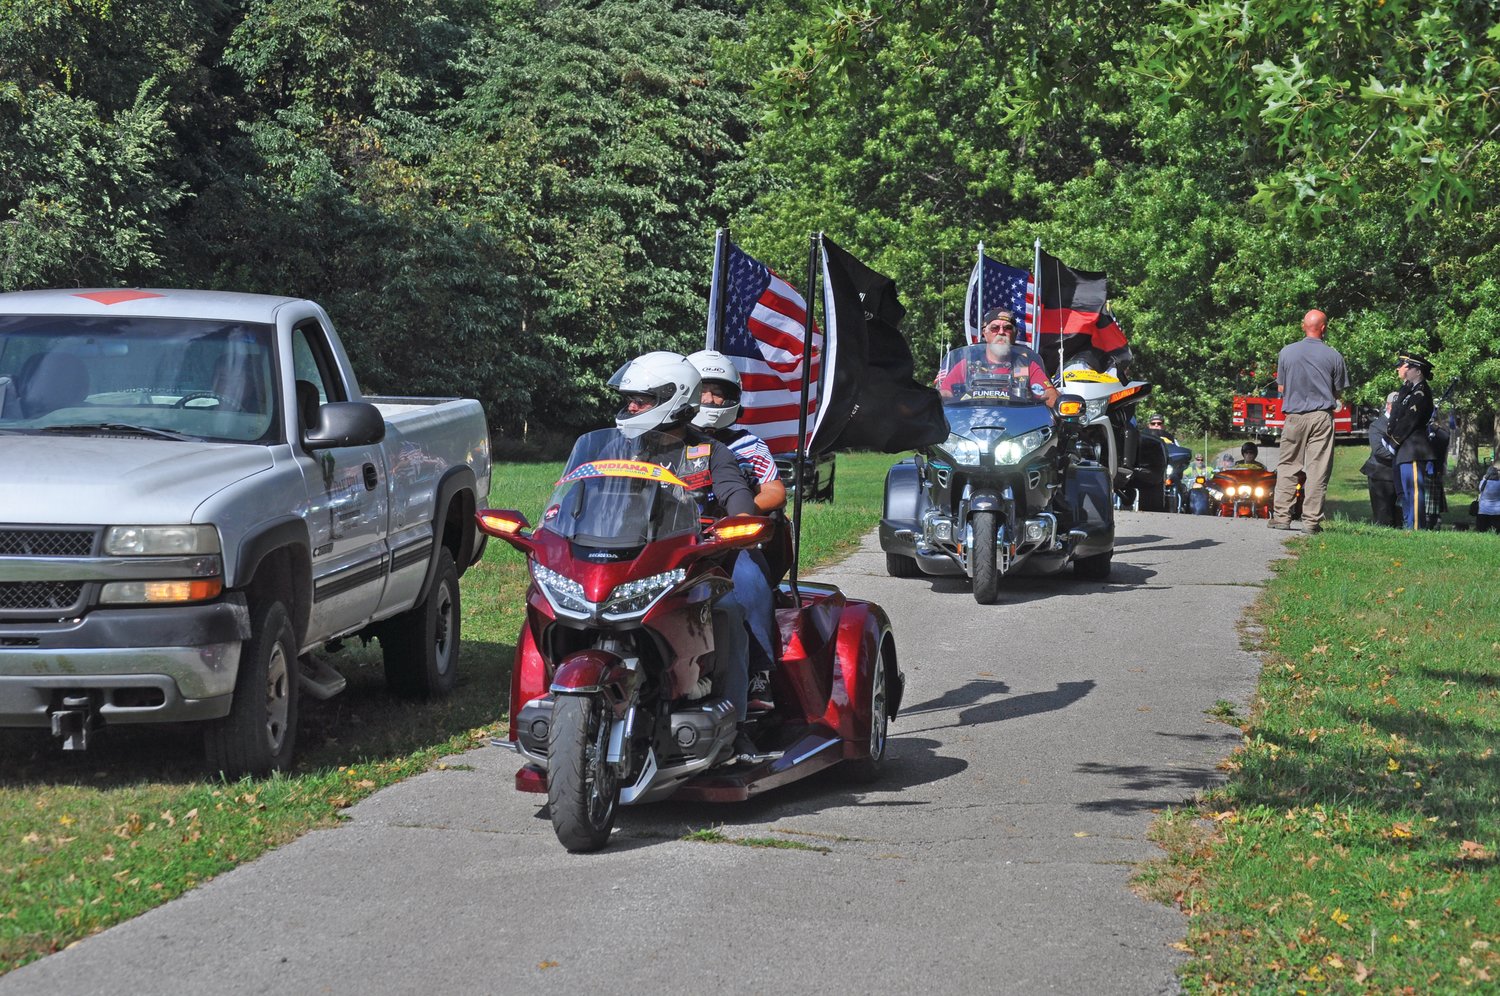 The Indiana Patriot Guard arrives at Oak Hill Cemetery North as part of the funeral processional for longtime Crawfordsville Fire Chief Dennis Weir on Monday.